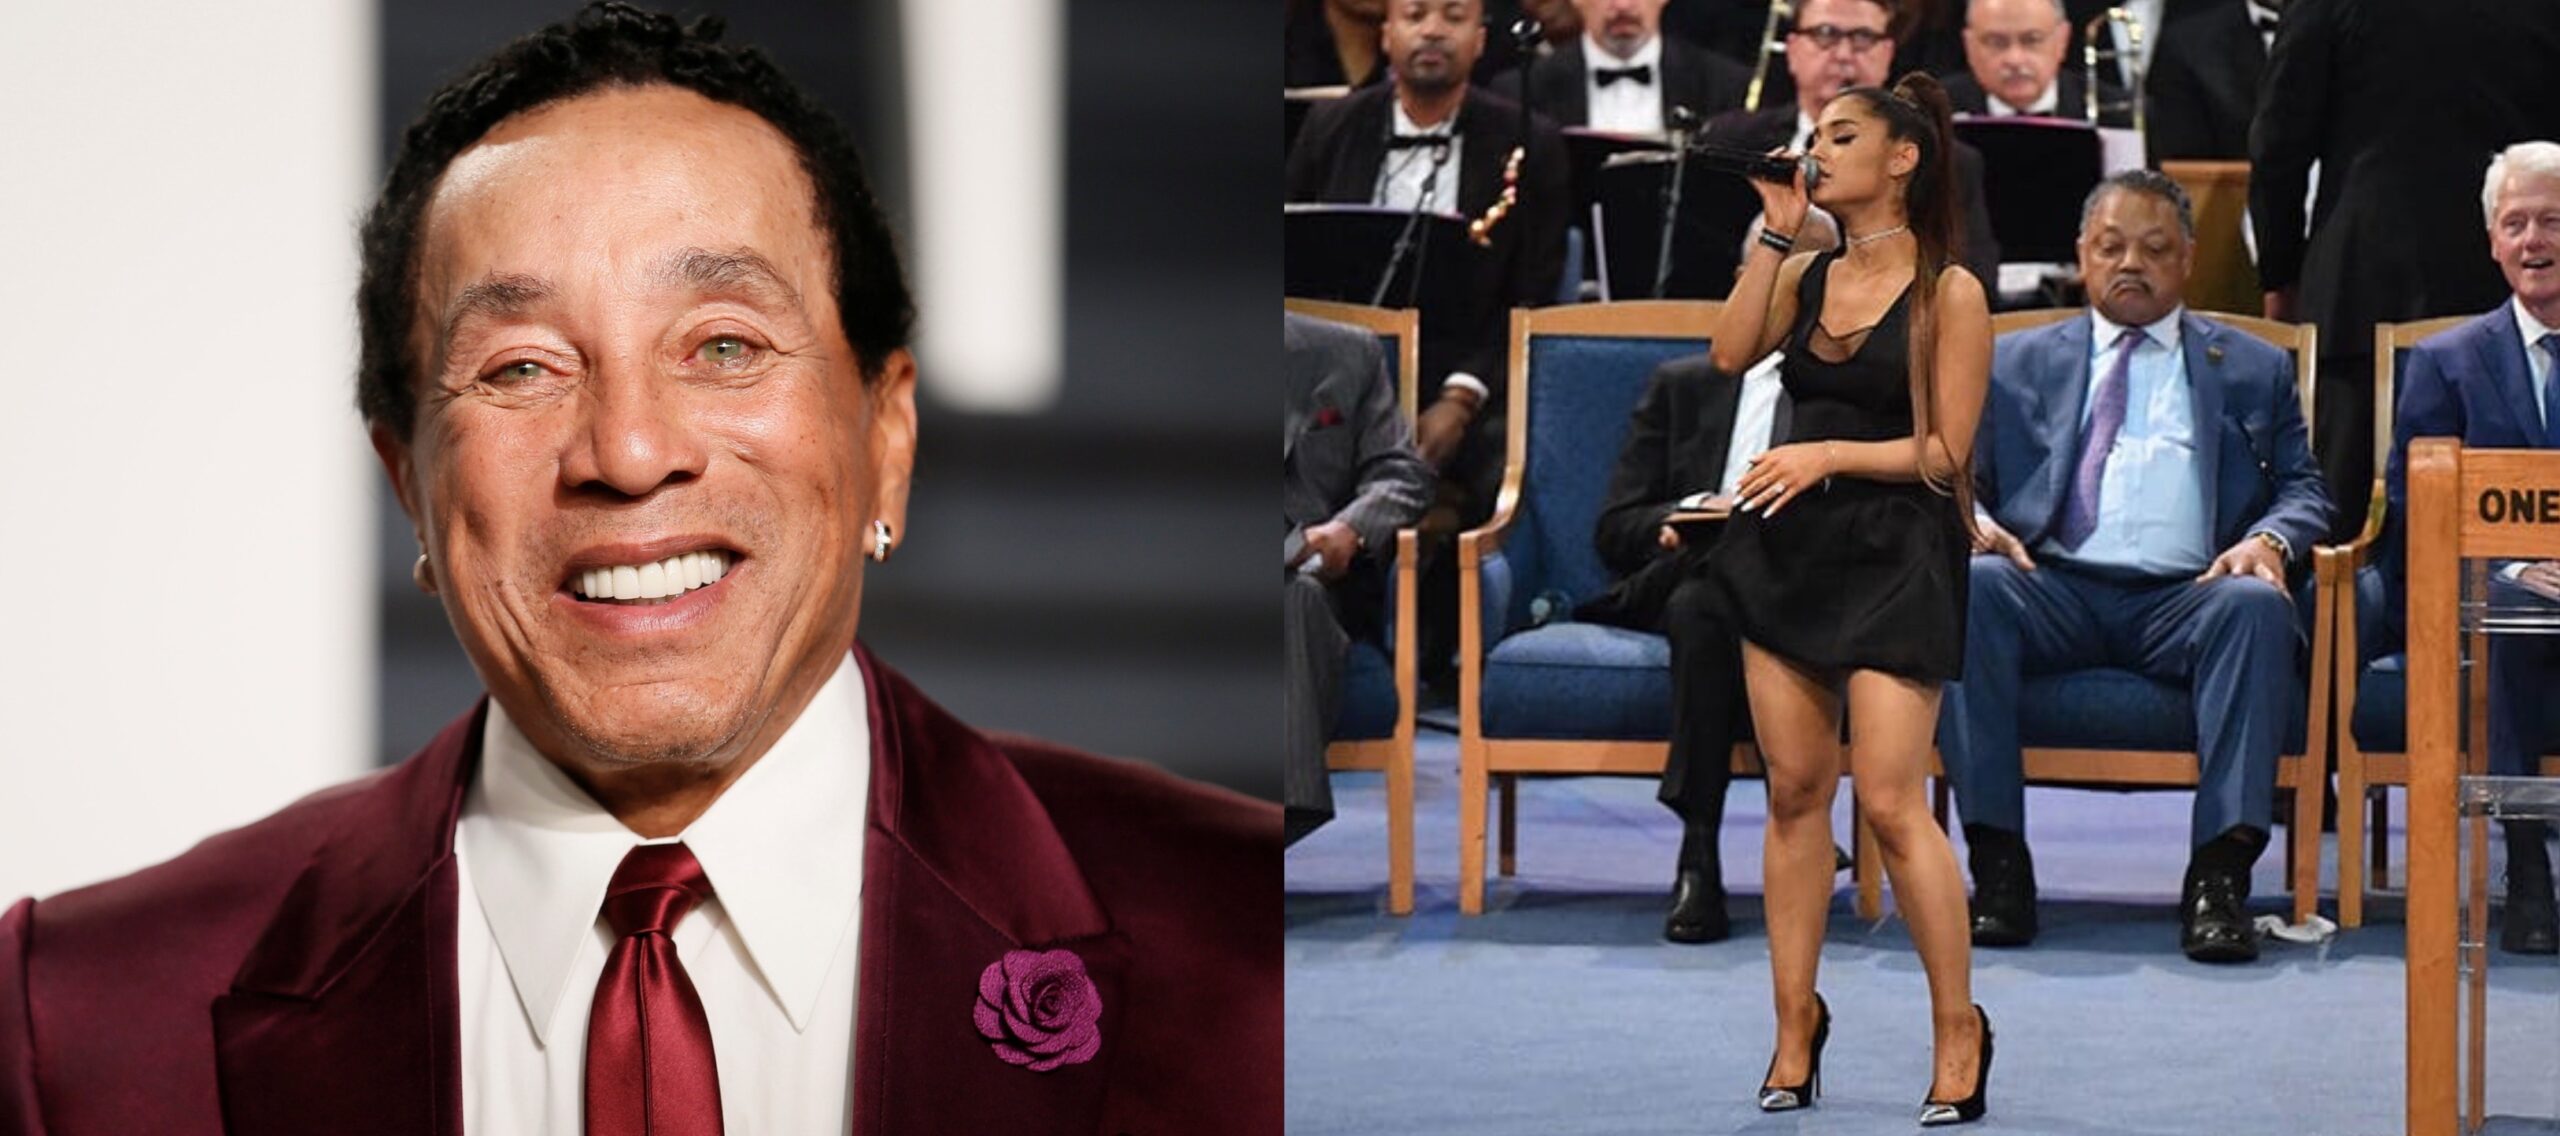 Smokey Robinson Agrees That Ariana Grande's Dress During Aretha Franklin's Funeral Was Inappropriate